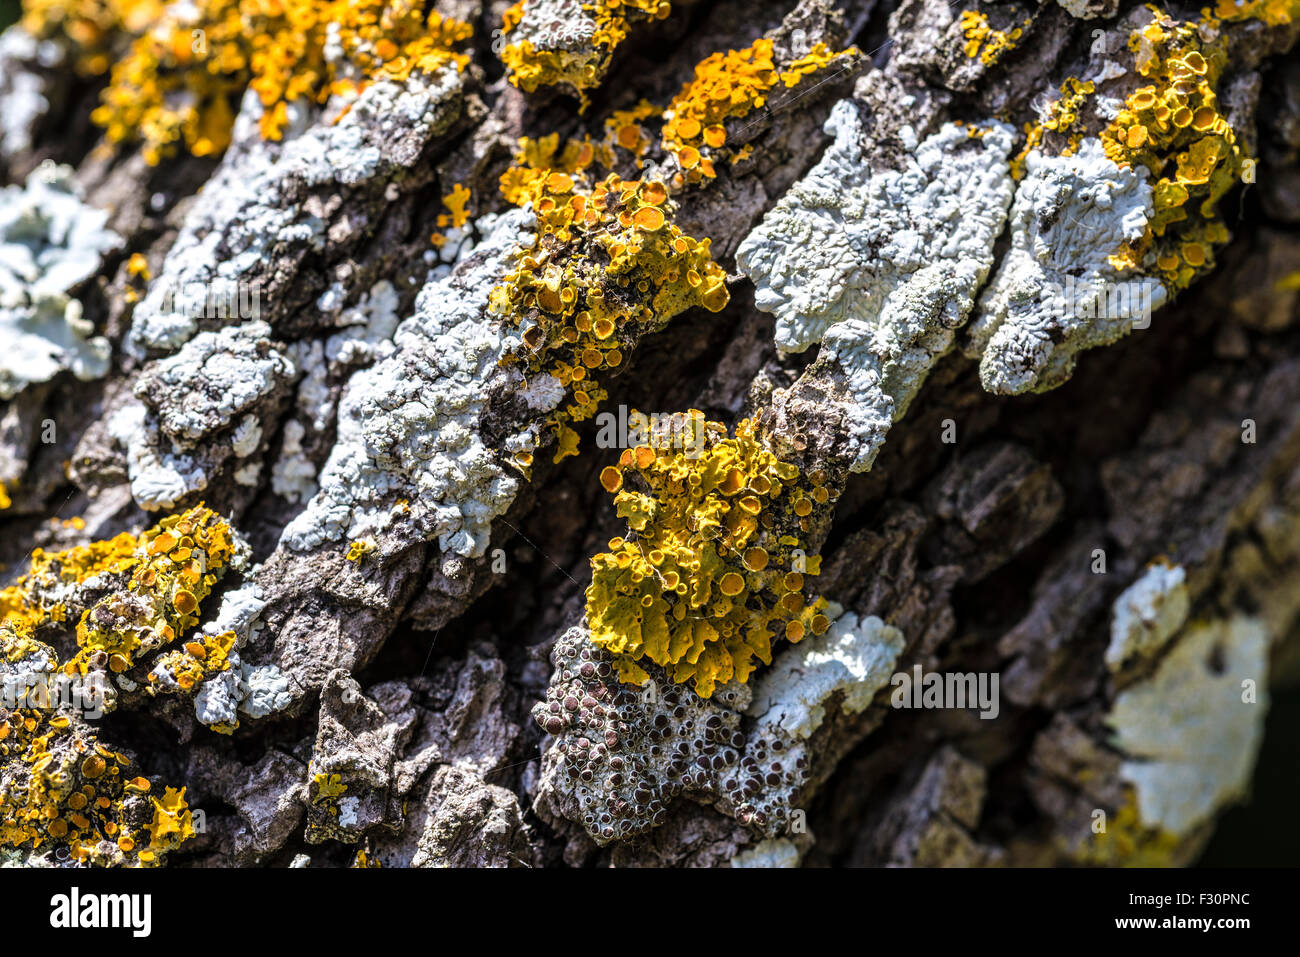 Texture of moss and lichen growing on the bark of a tree Stock Photo